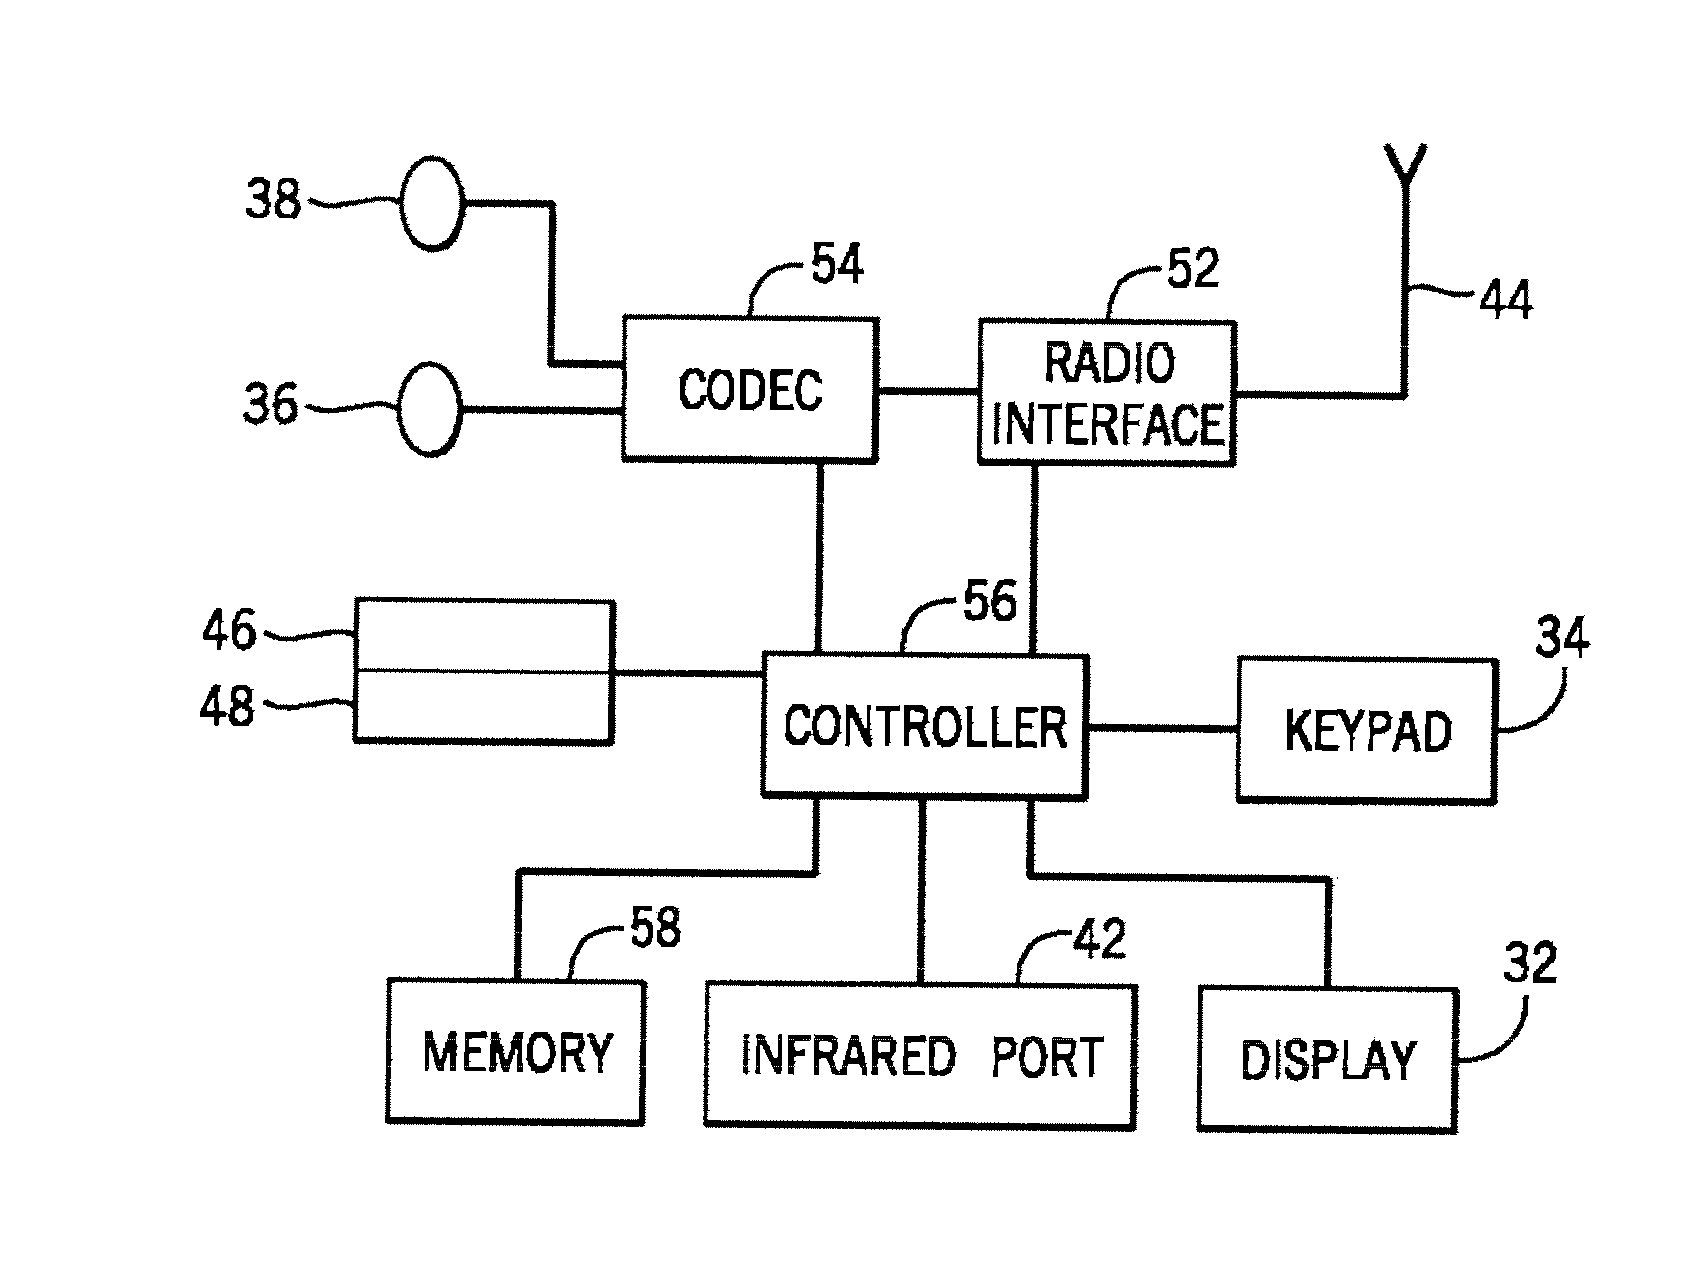 System and method for using parallelly decodable slices for multi-view video coding